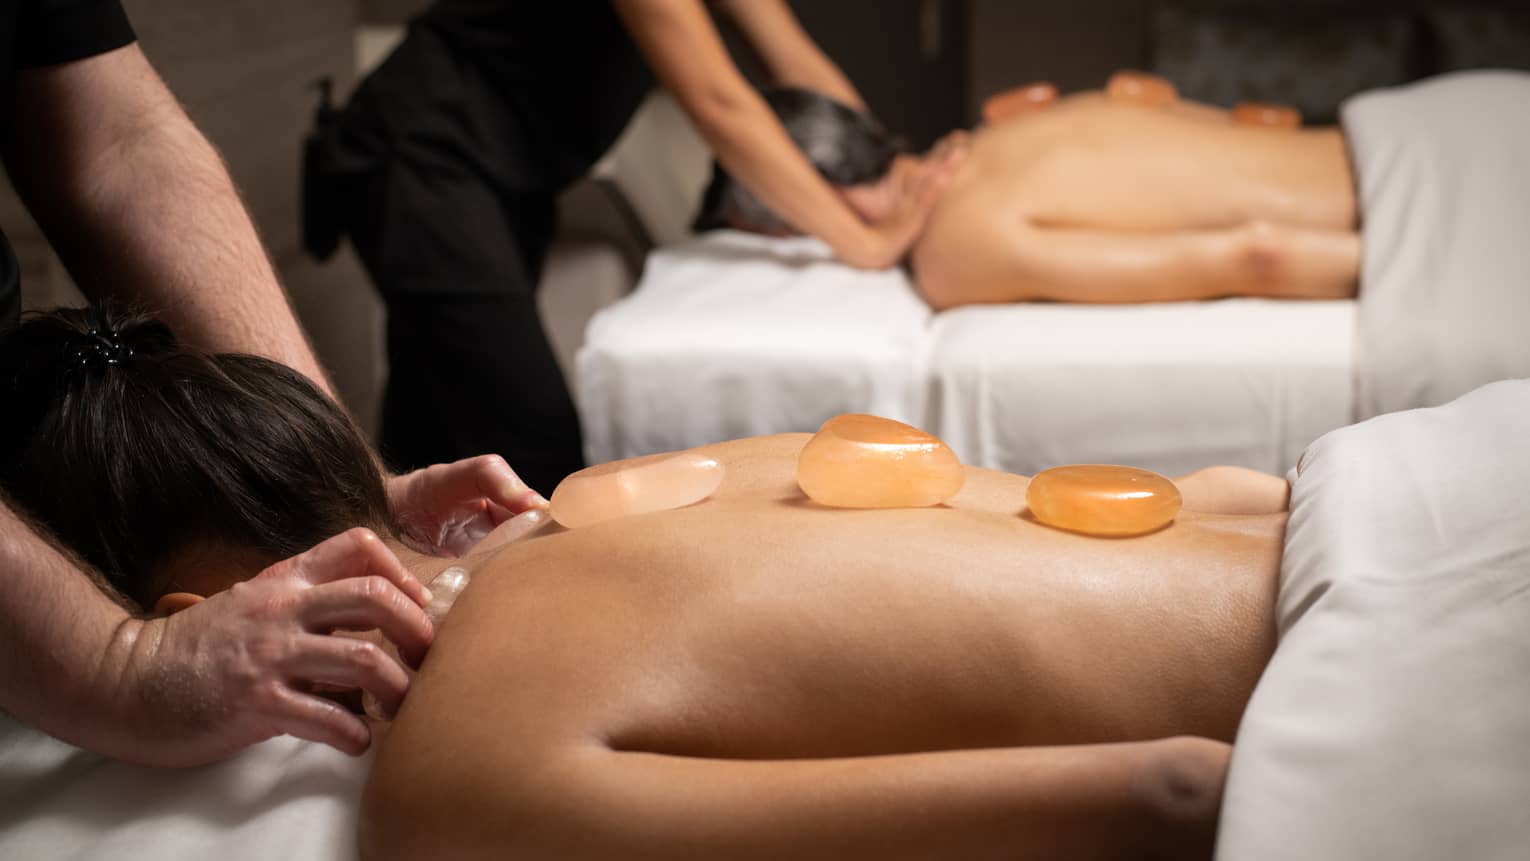 Two people getting a massage with small stones on their backs.